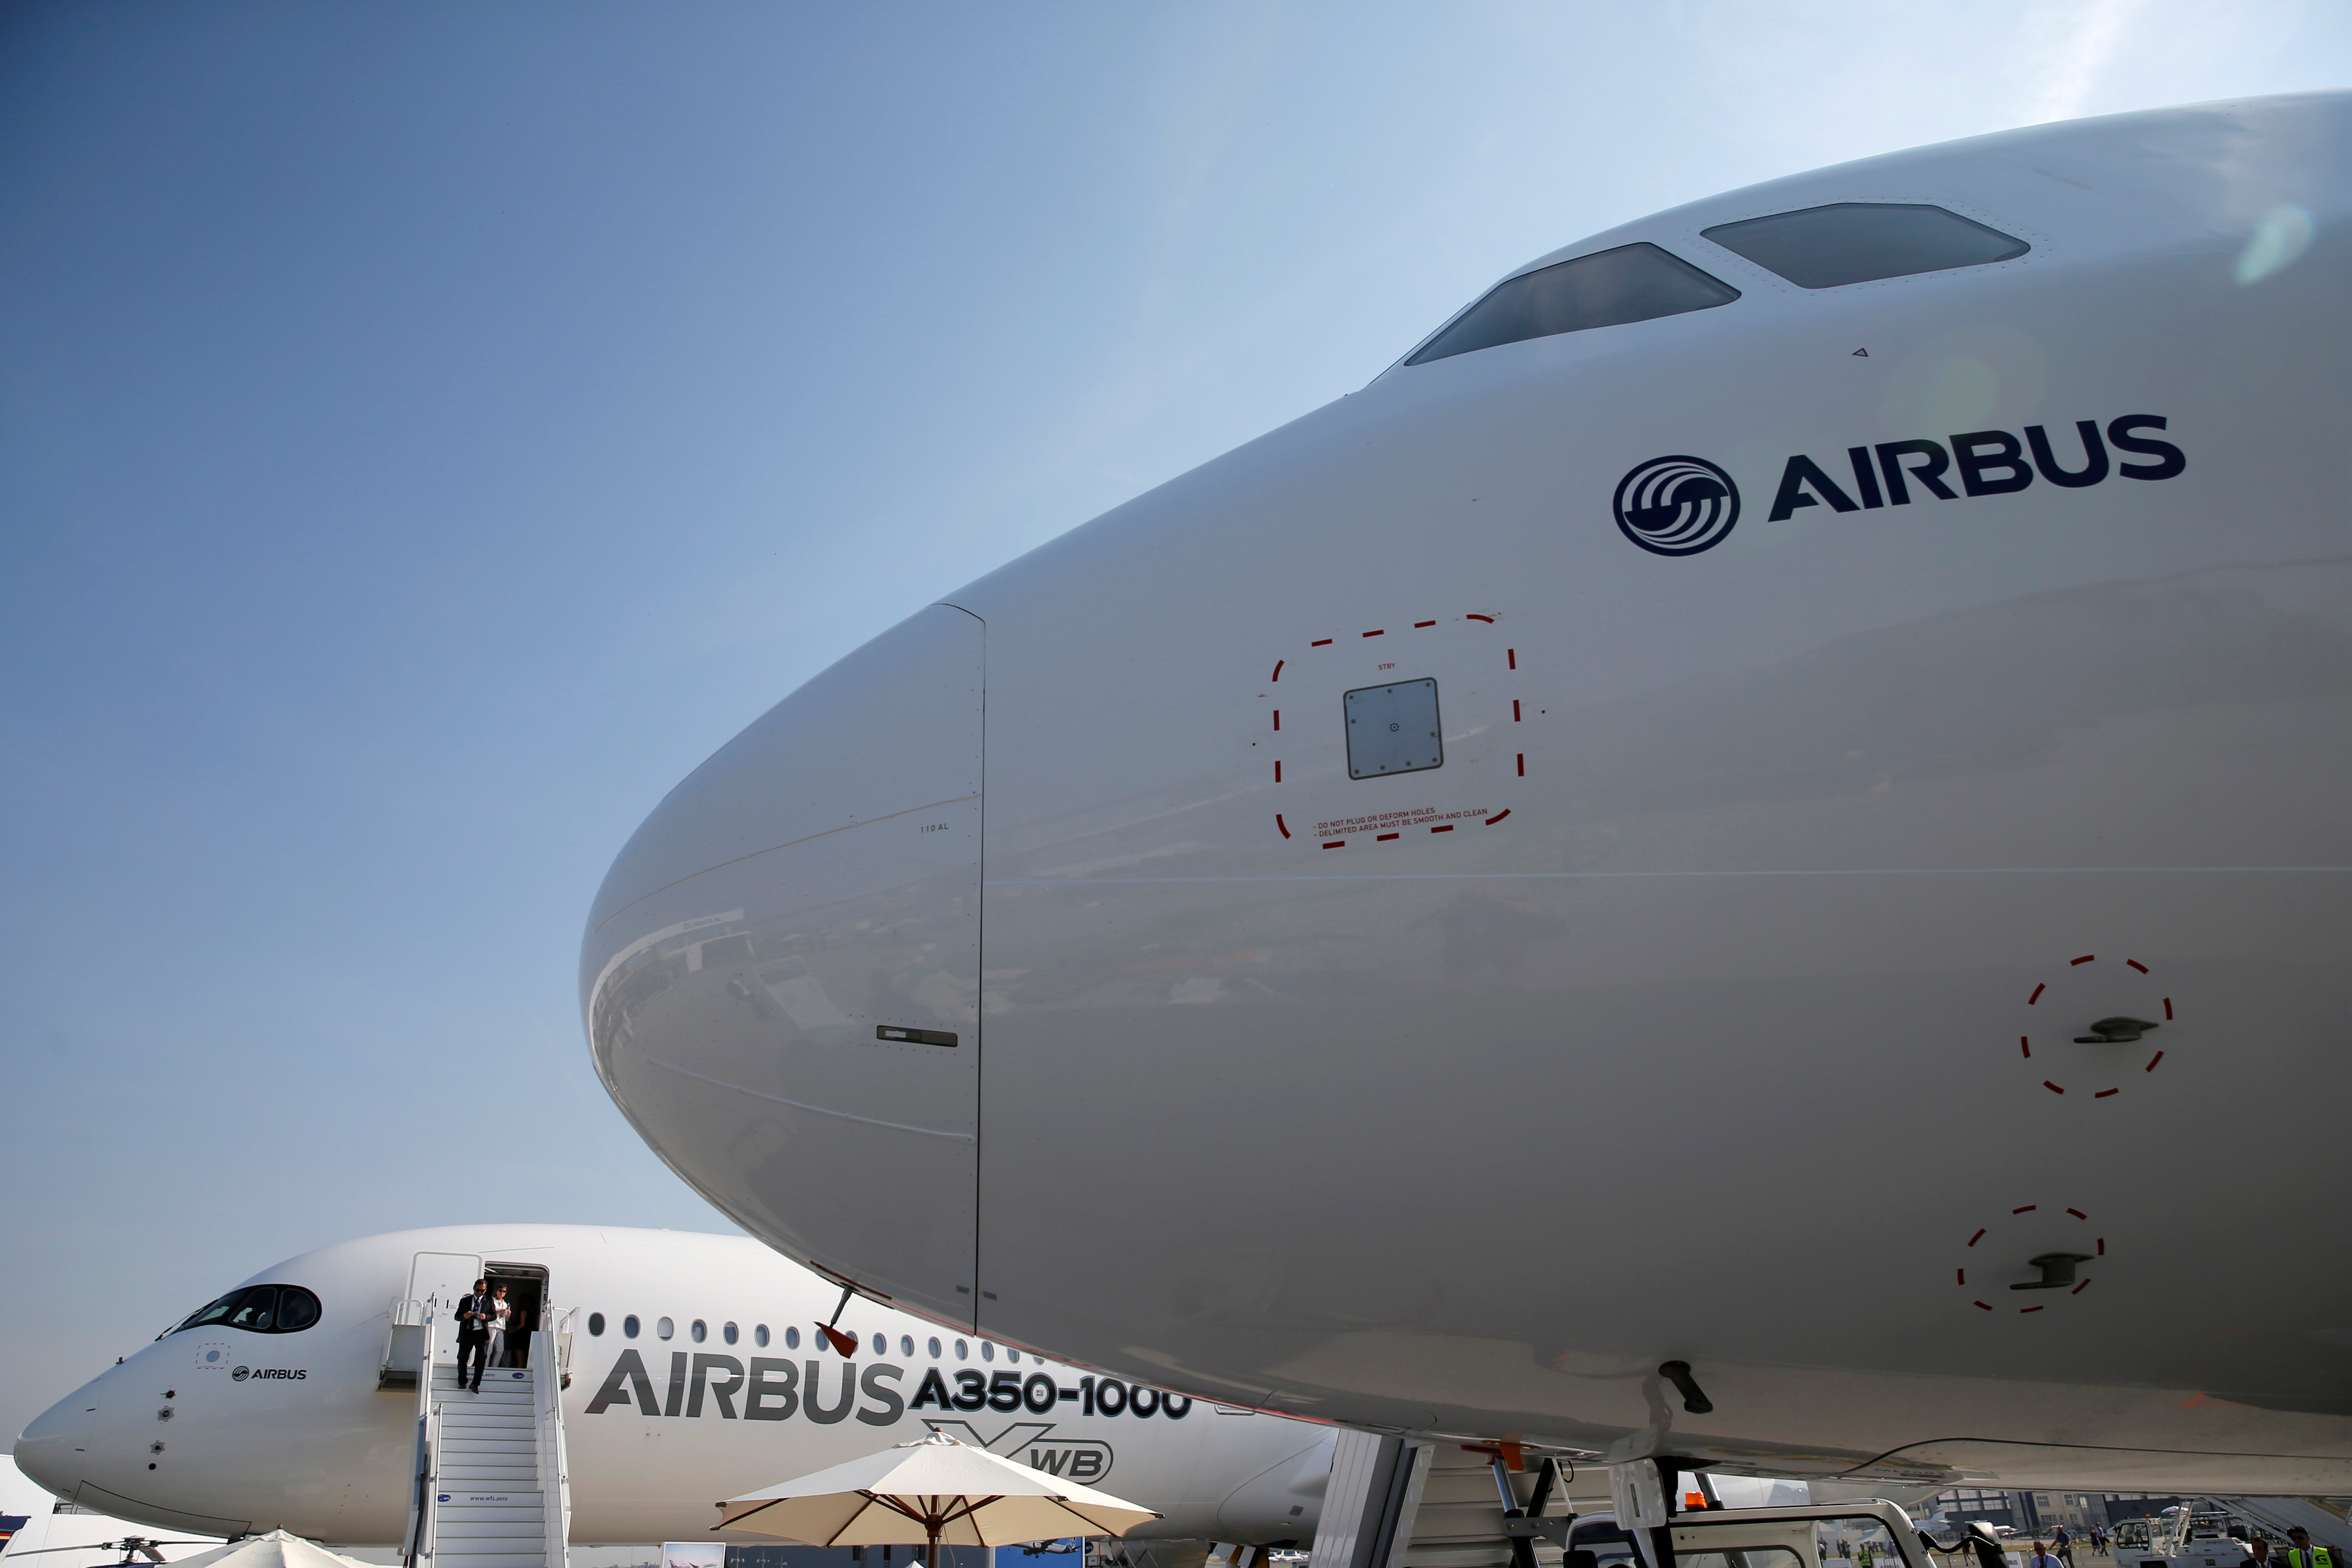 An Airbus A350-1000 Xwb and an Airbus A321neo are seen on static display during the 52nd Paris Air Show at Le Bourget Airport near Paris